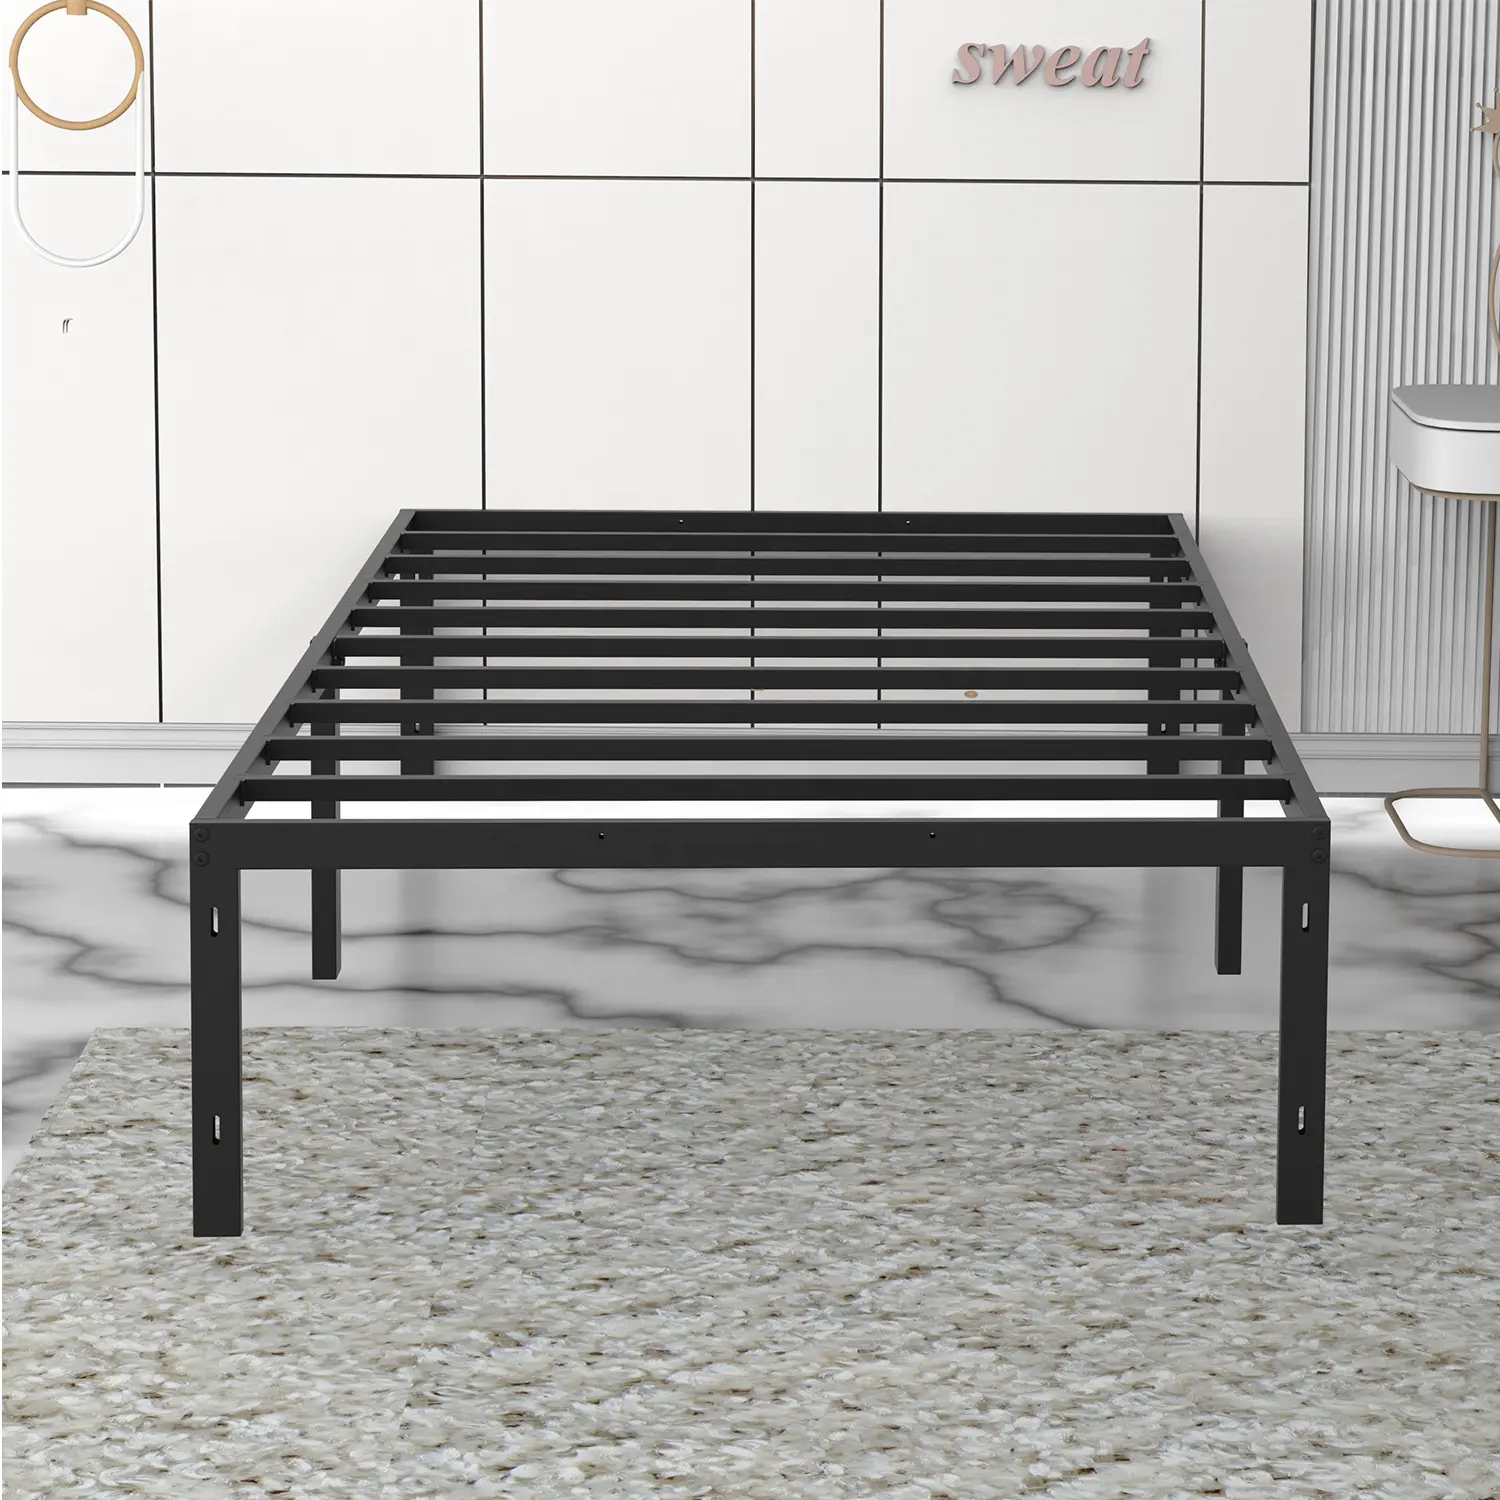 75*38 Inch Home Furniture Black Loft Hotel Metal Full Size King Queen Single Bed Frame